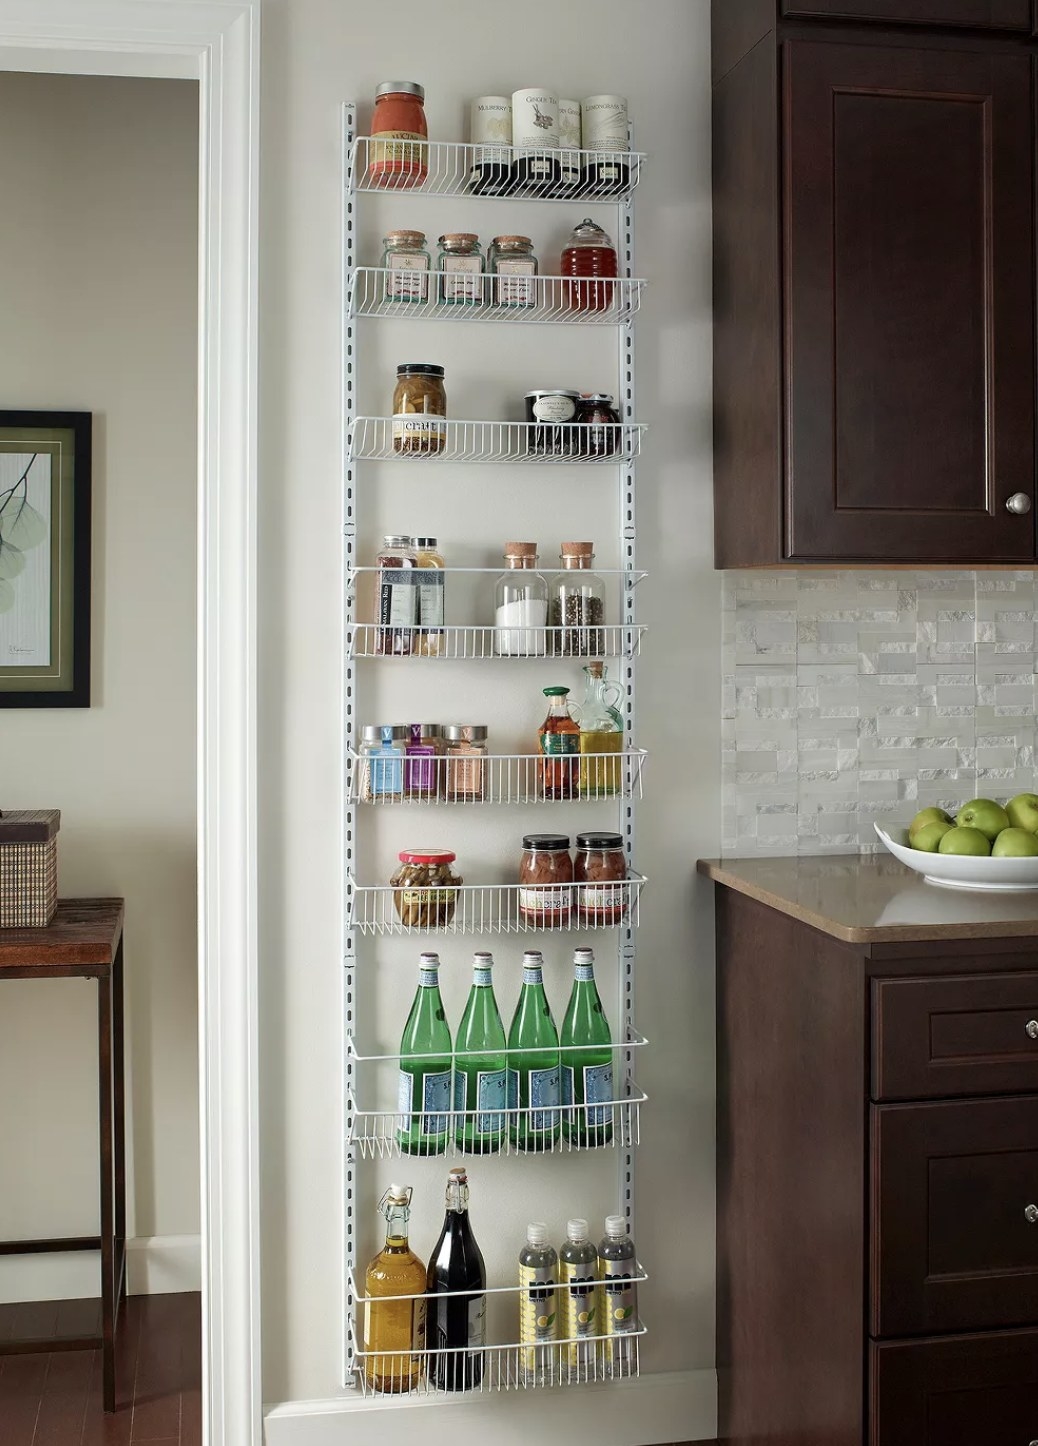 A wire rack mounted on the wall of a kitchen holding various spices, oils, sauces, and large seltzer bottles